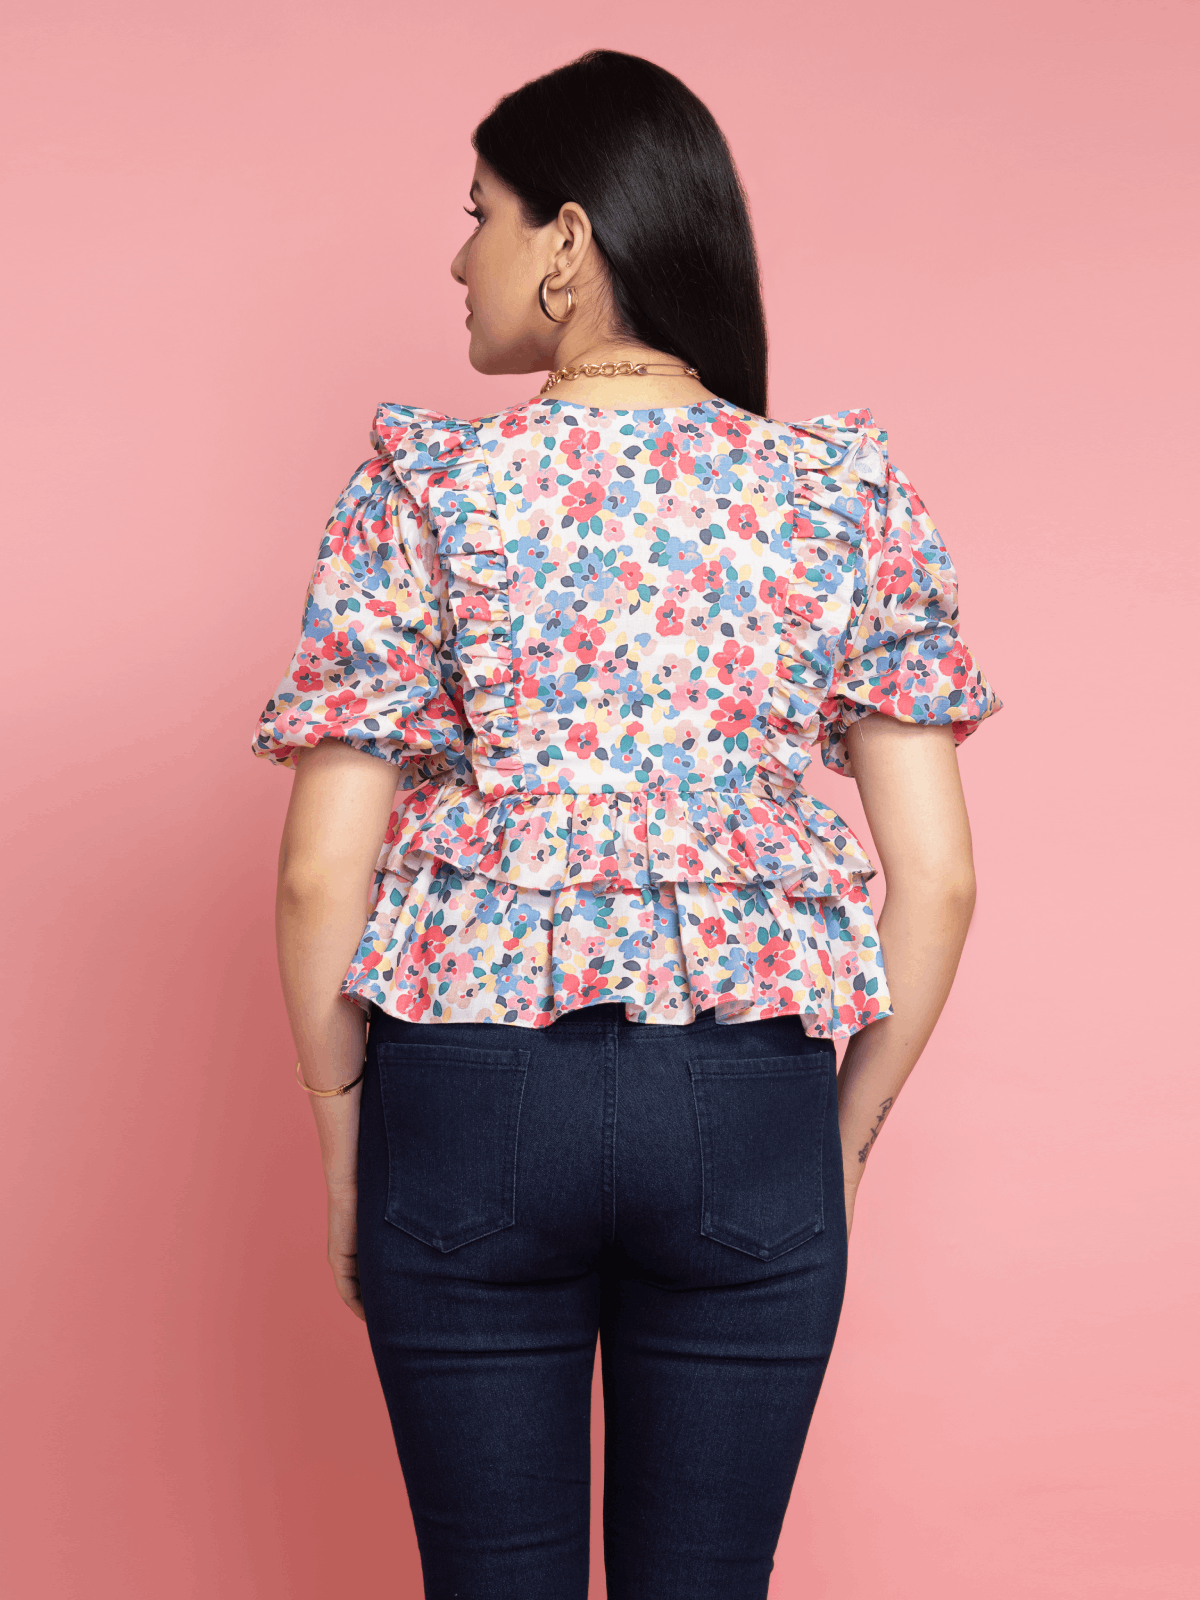 Floral Flared Ruffle Top For Women at Best Price | OCTICS